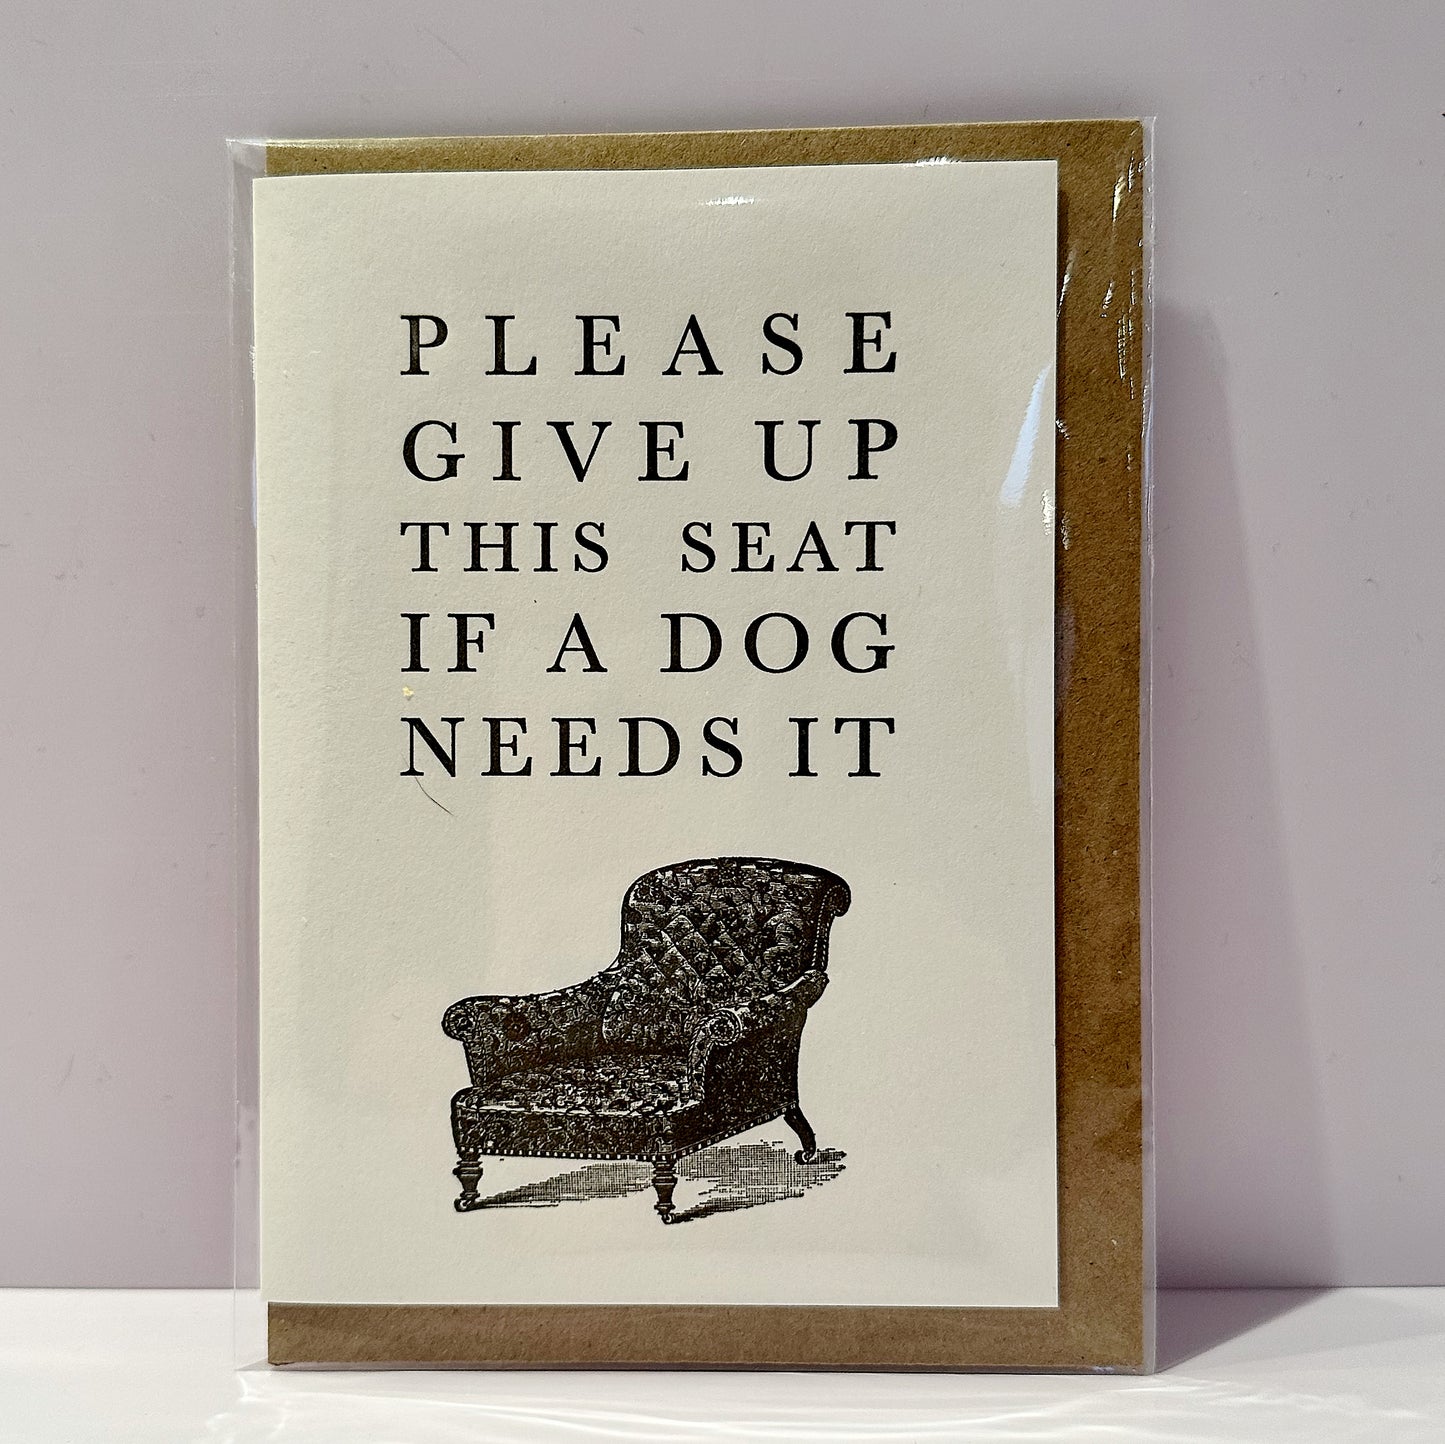 Copy of Please Give Up This Seat if a Dog Needs It Greetings Card